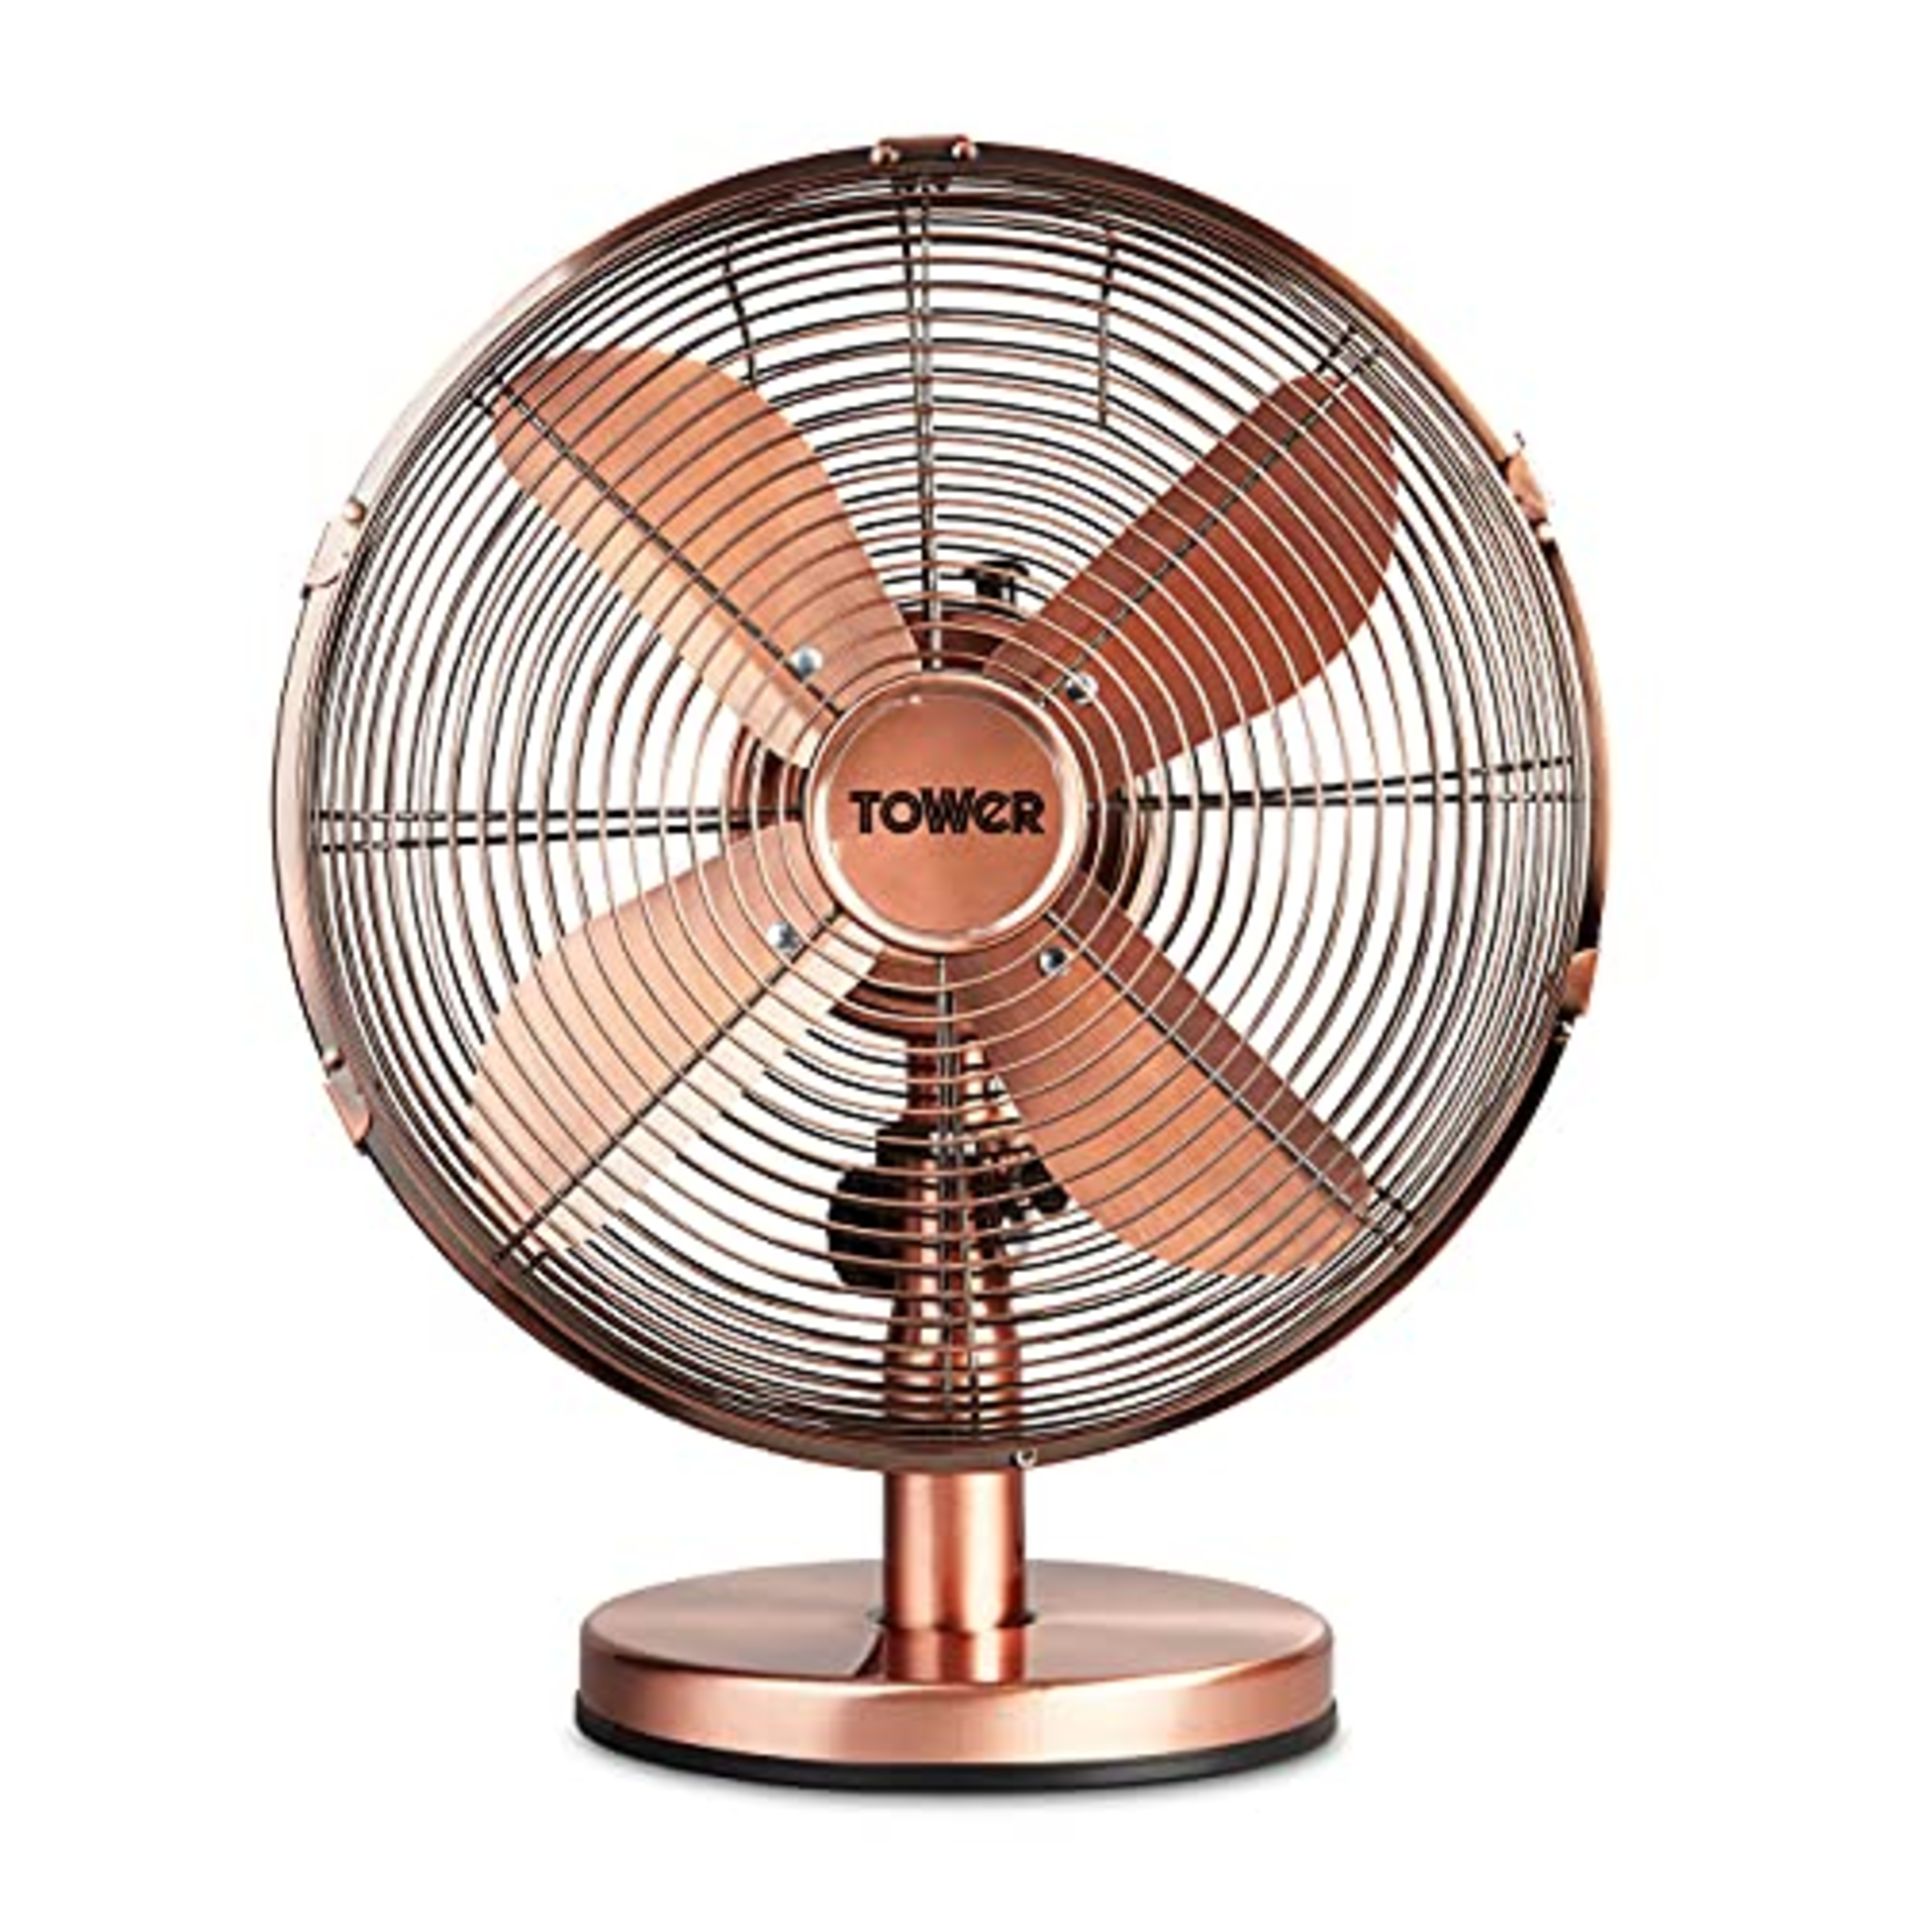 Tower T605000C Metal Desk Fan with 3 Speeds, Automatic Oscillation, 12 , 35W, Copper